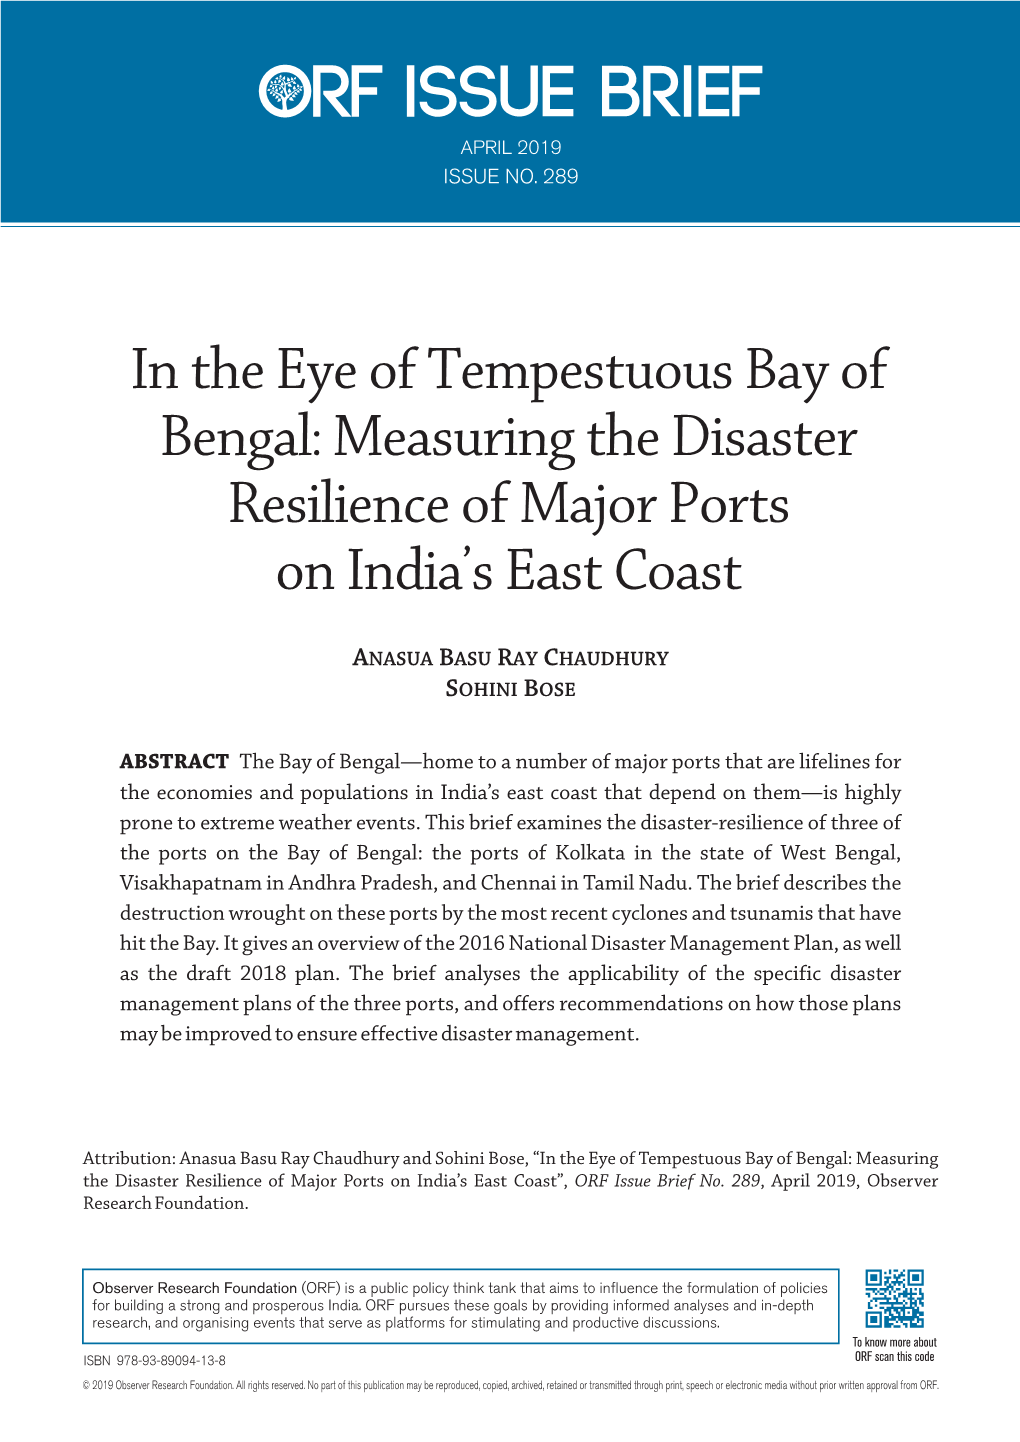 In the Eye of Tempestuous Bay of Bengal: Measuring the Disaster Resilience of Major Ports on India’S East Coast